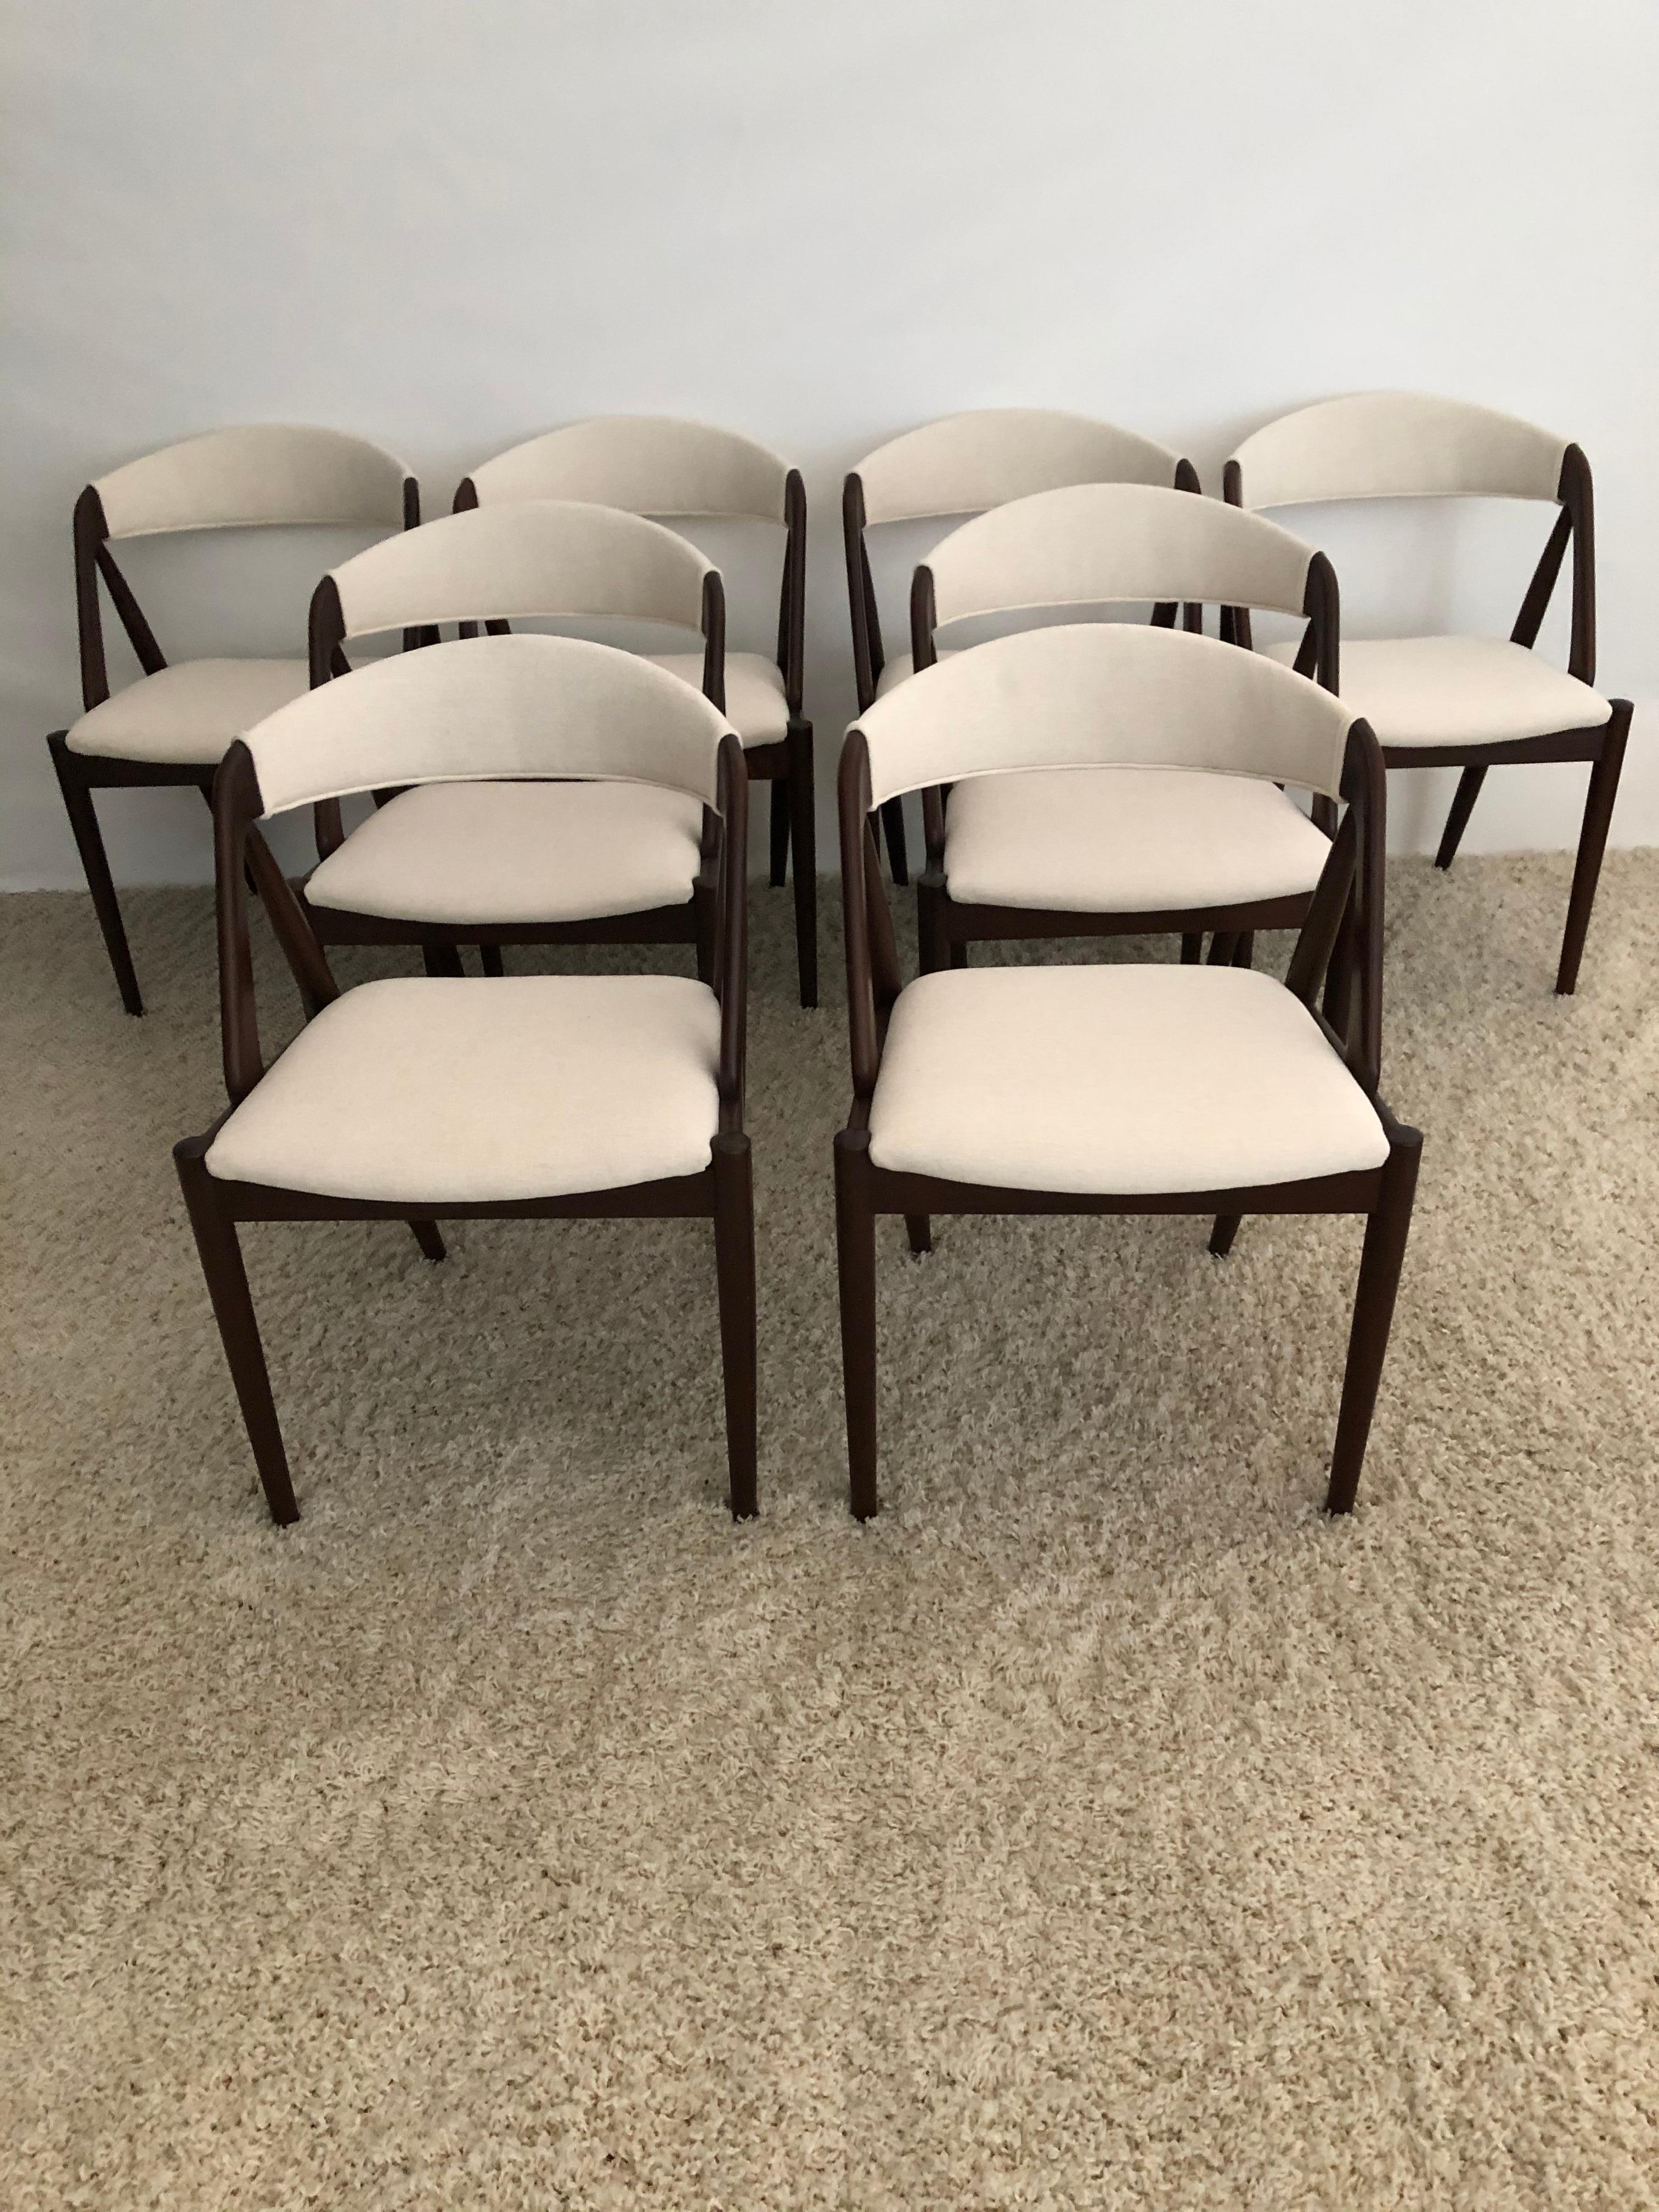 Kai Kristiansen set of 8 dark walnut dining chairs, upholstery a light cream off-white linen. Together with original Raymor tags, in original
Finish. Large round dining table pictured in photos, table opens very large to seat 12-14 Charles Webb